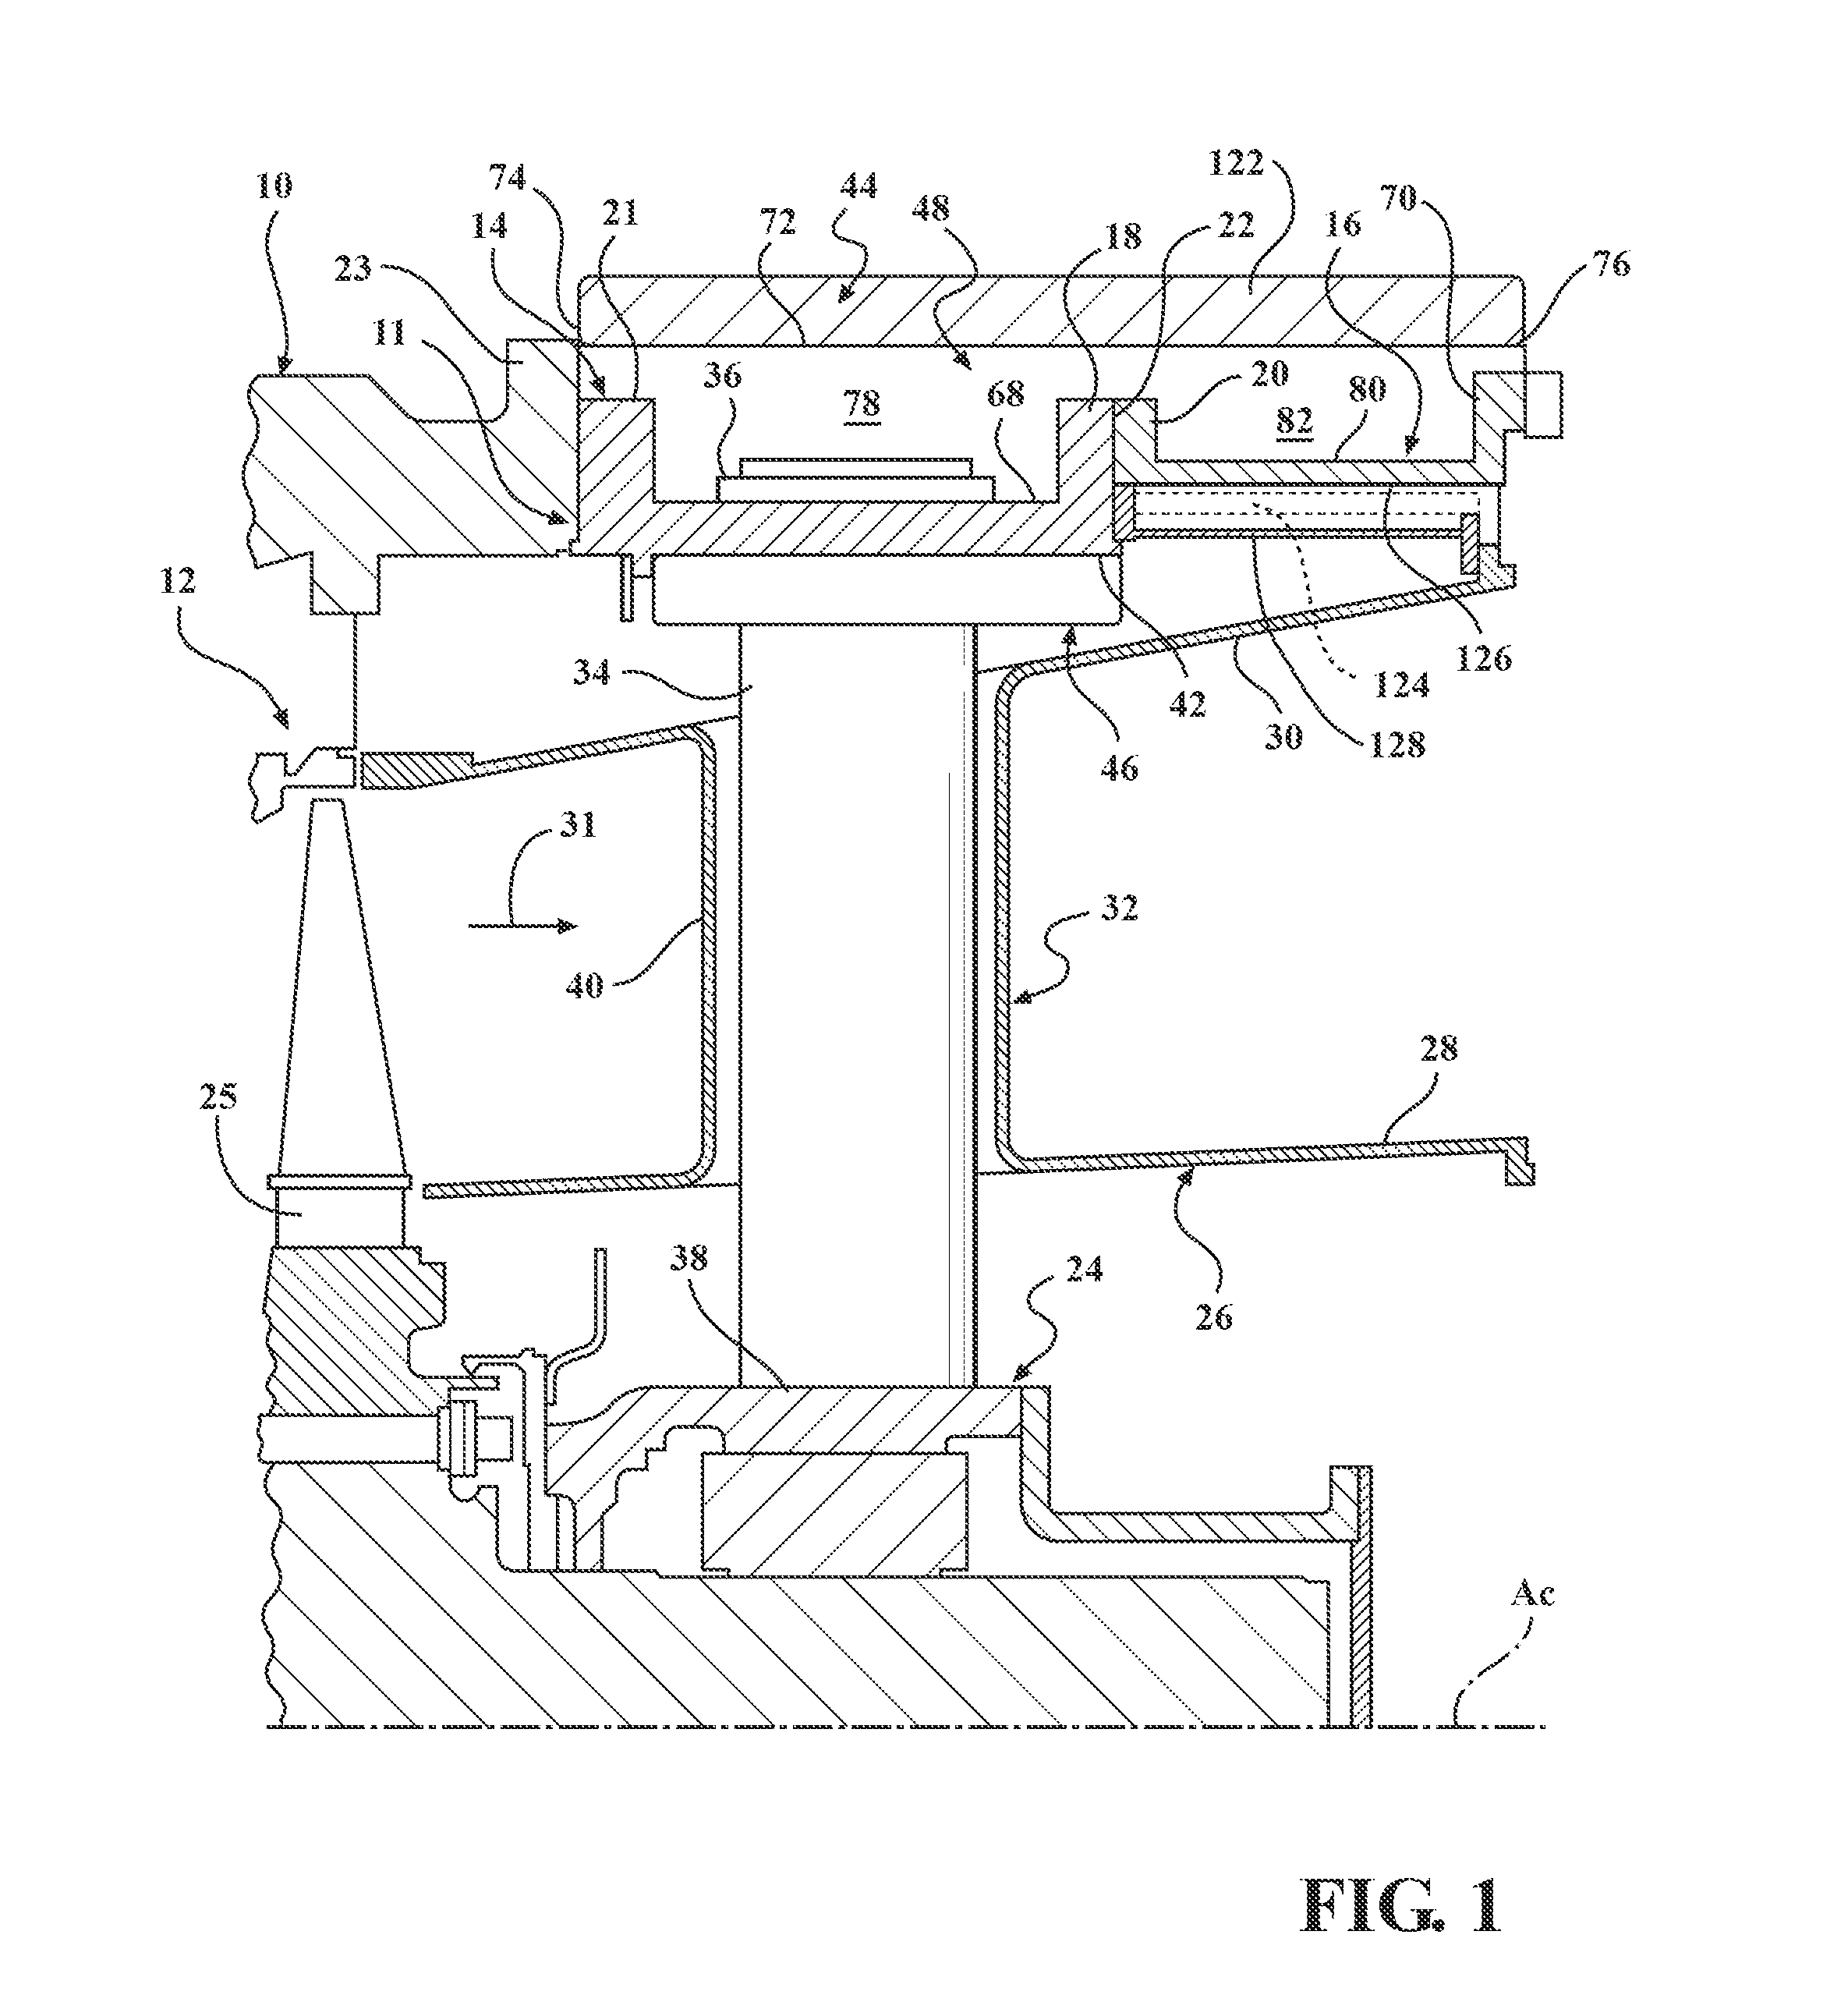 Gas turbine outer case active ambient cooling including air exhaust into a sub-ambient region of exhaust flow